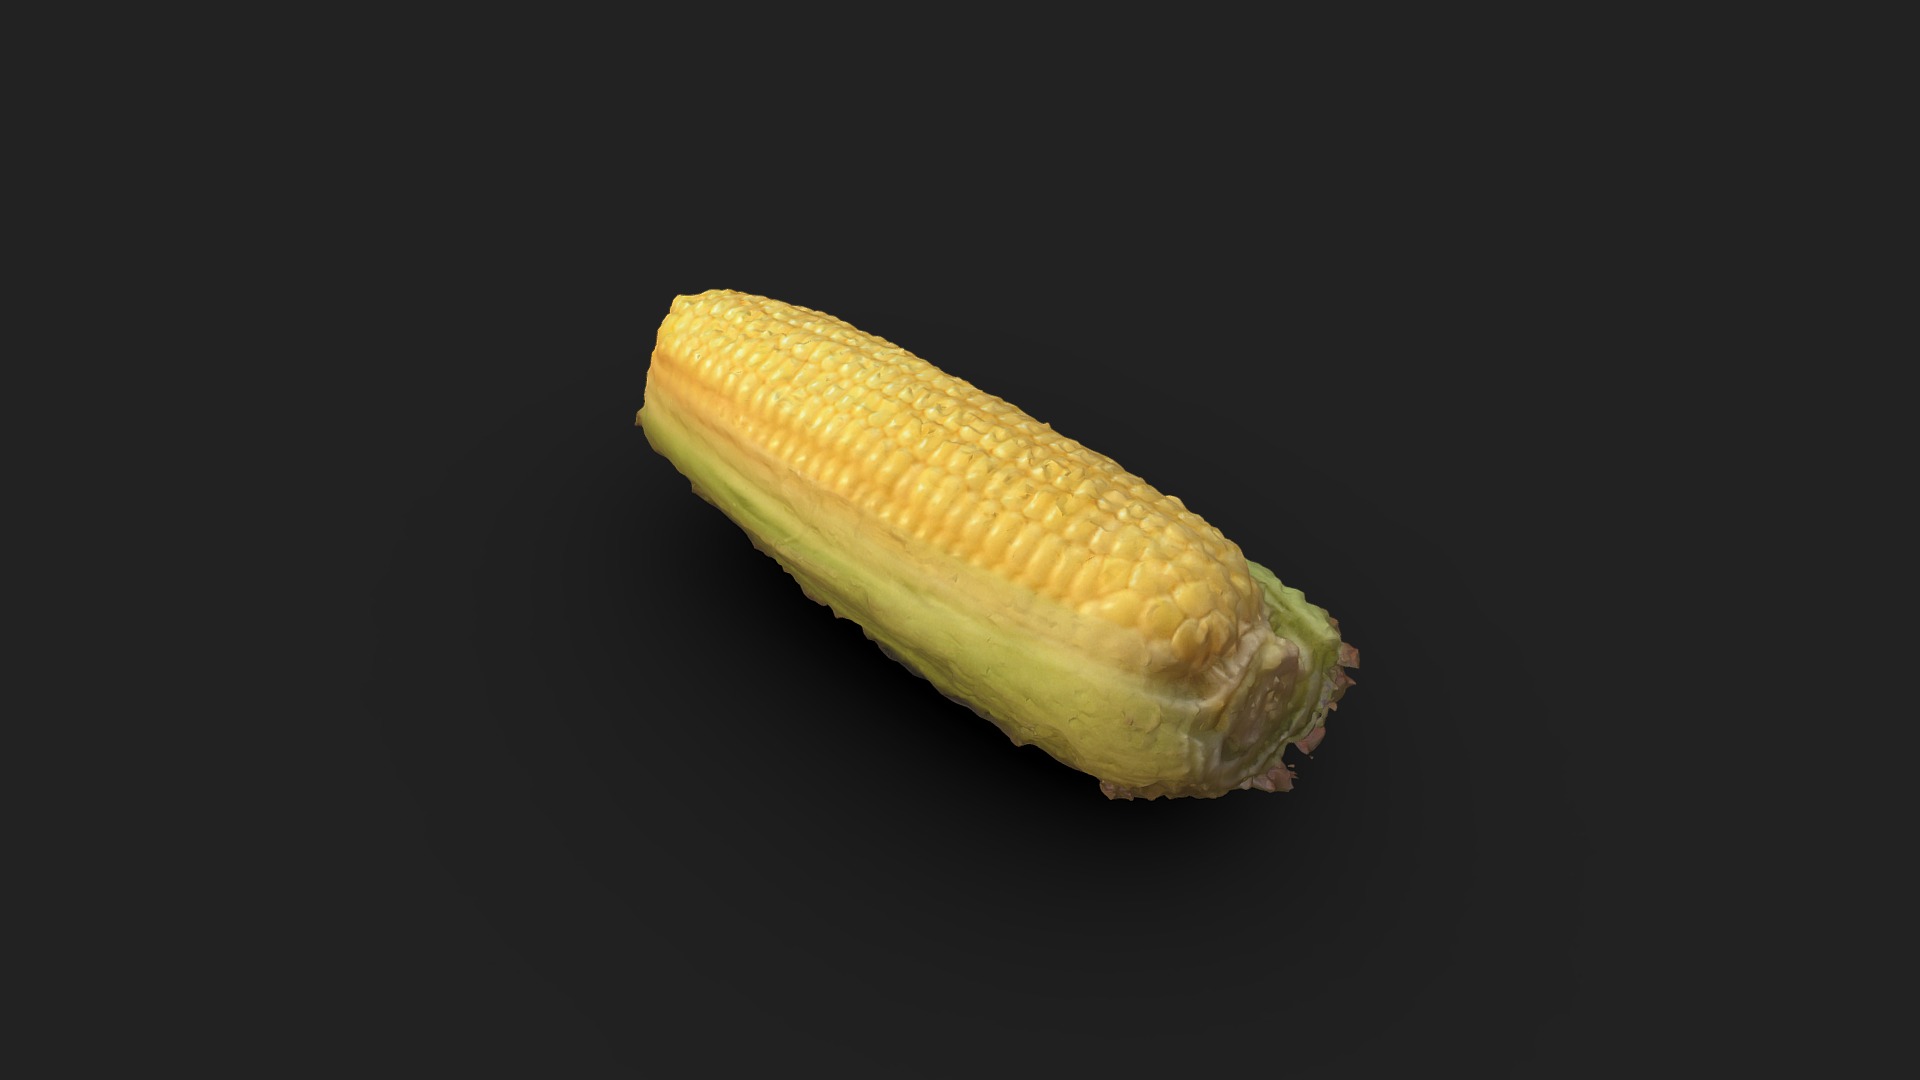 3D model Yellow Corn 3D model - This is a 3D model of the Yellow Corn 3D model. The 3D model is about a yellow vegetable on a black background.